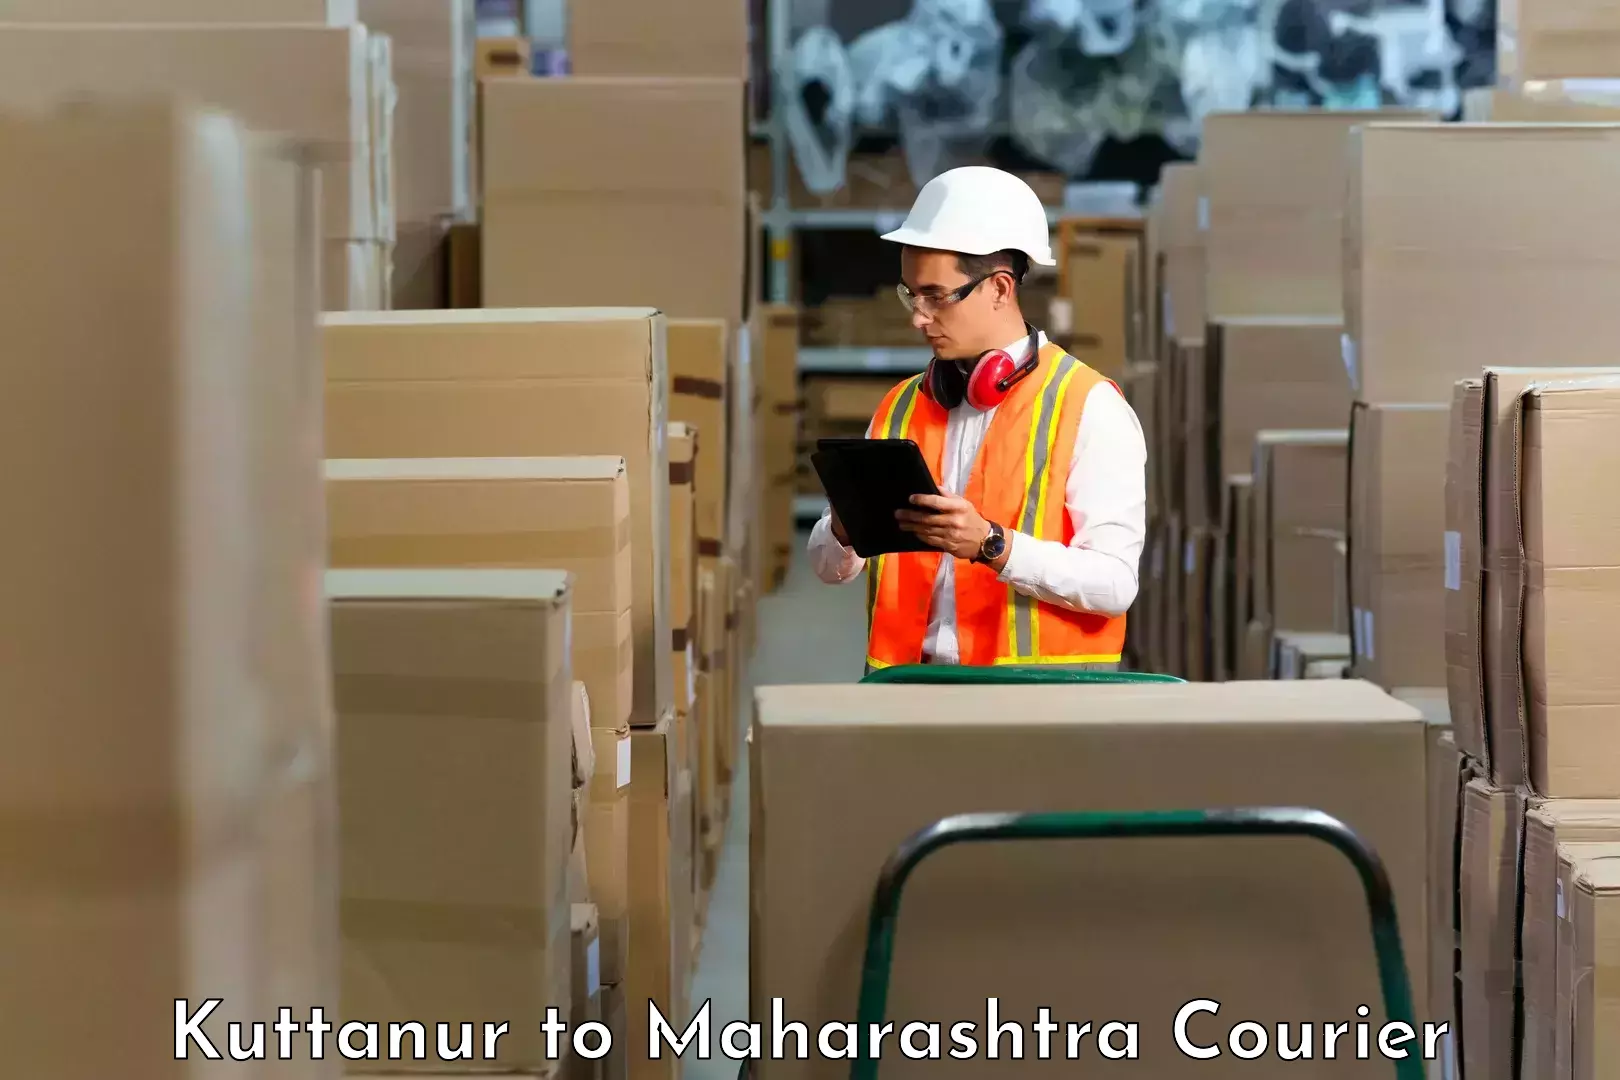 Reliable courier service Kuttanur to Mumbai Port